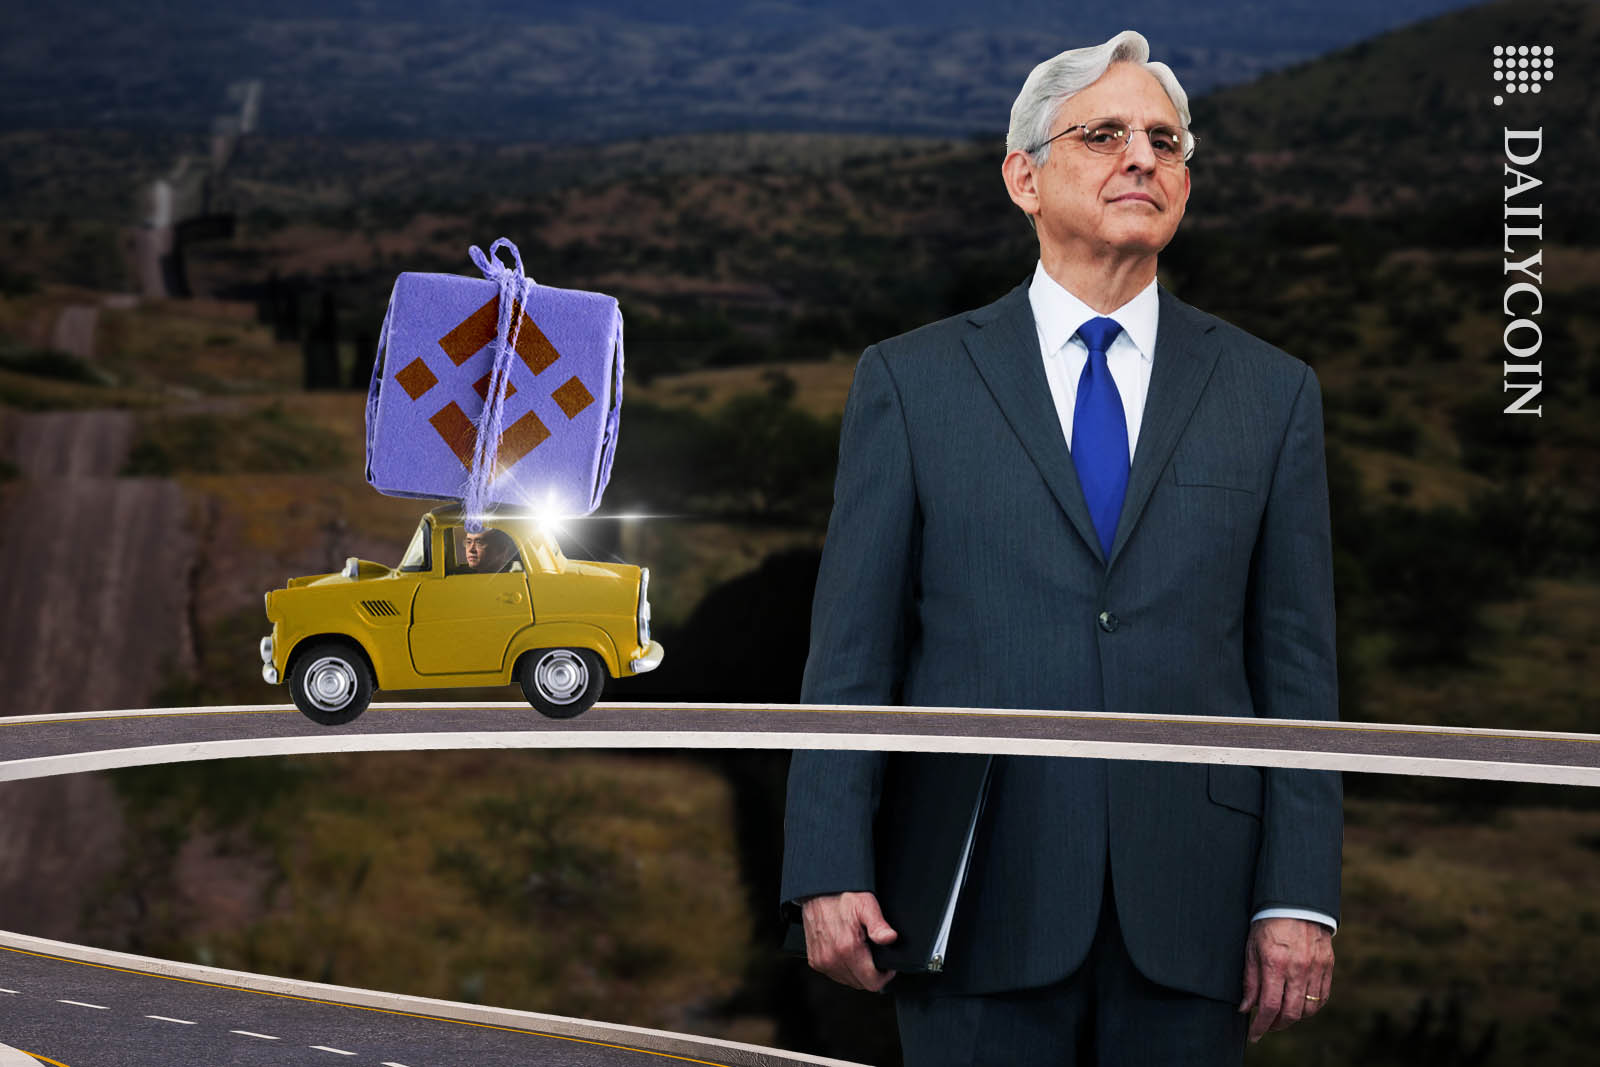 Attorney General Merrick B. Garland overlooking Binance and Changpeng Zhao leaving the United States.